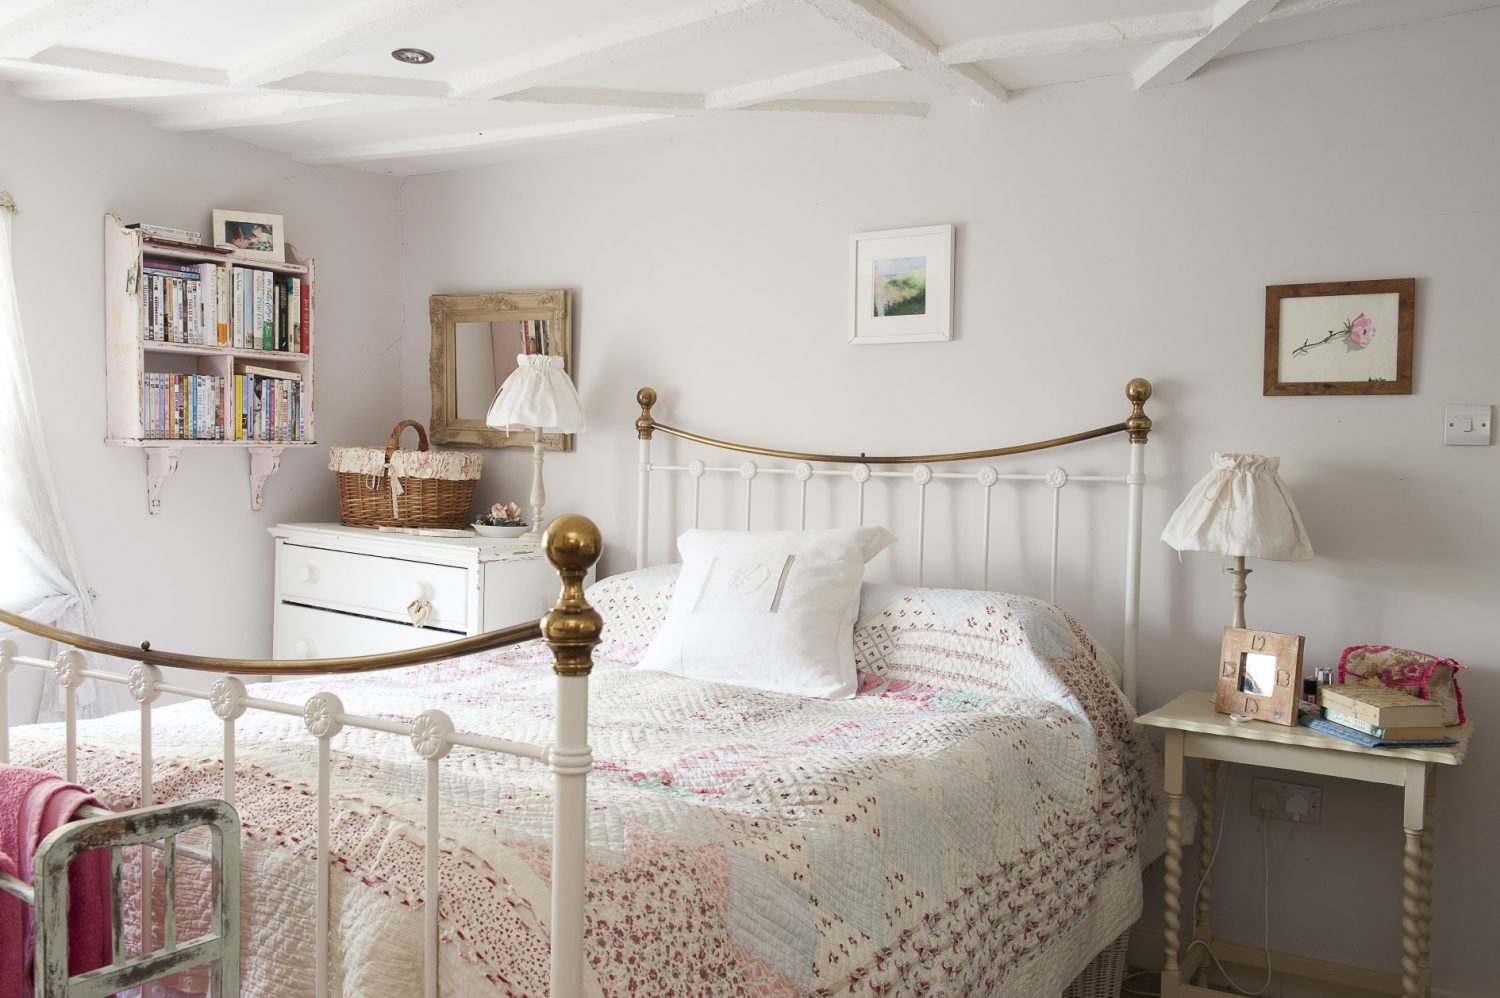 Personal touches such as family photos, favourite books and paintings add interest to the carefully decorated and designed bedrooms. The whole ceiling has been painted white, where once the beams were painted black – giving a sense of light and space